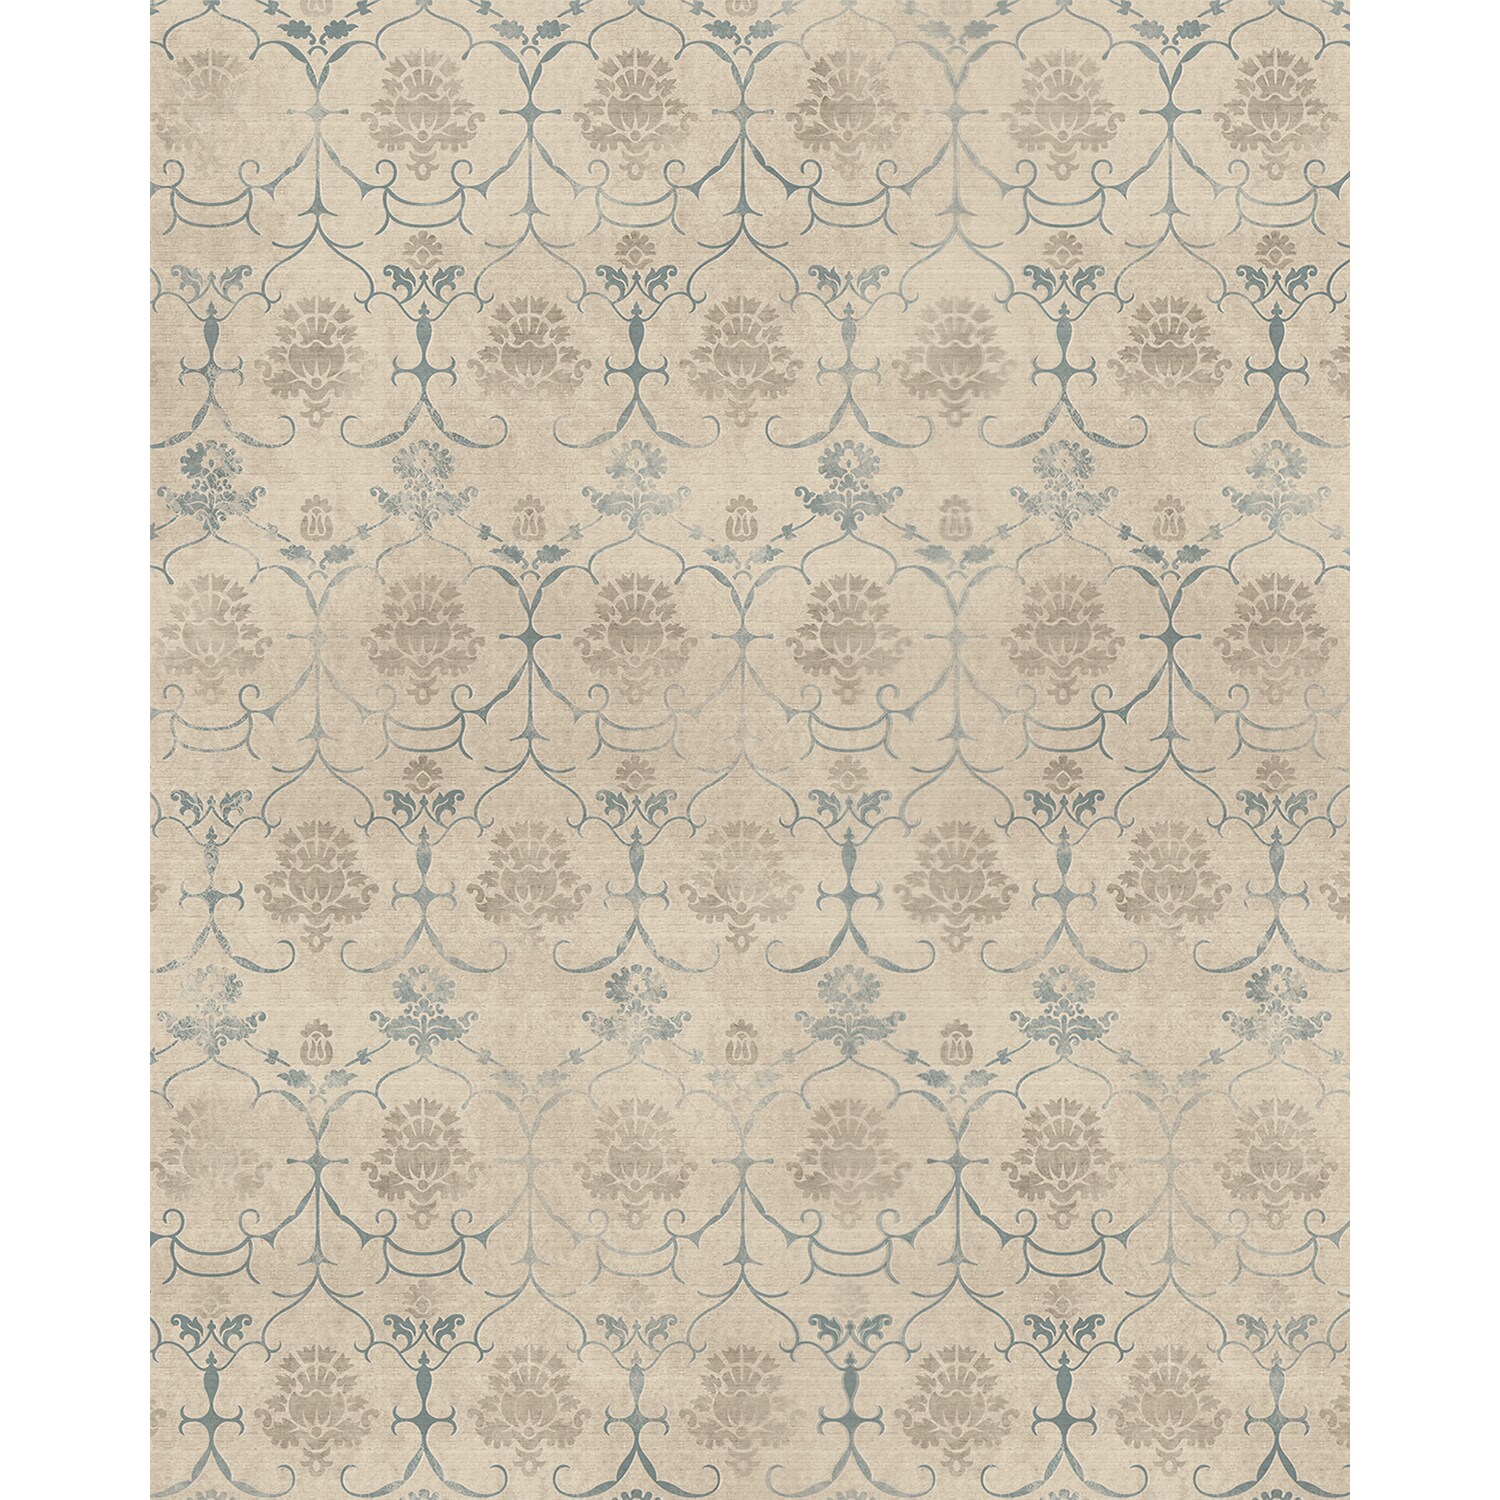 Ruggable Washable 8 x 10 Cream Damask Area Rug at Lowes.com